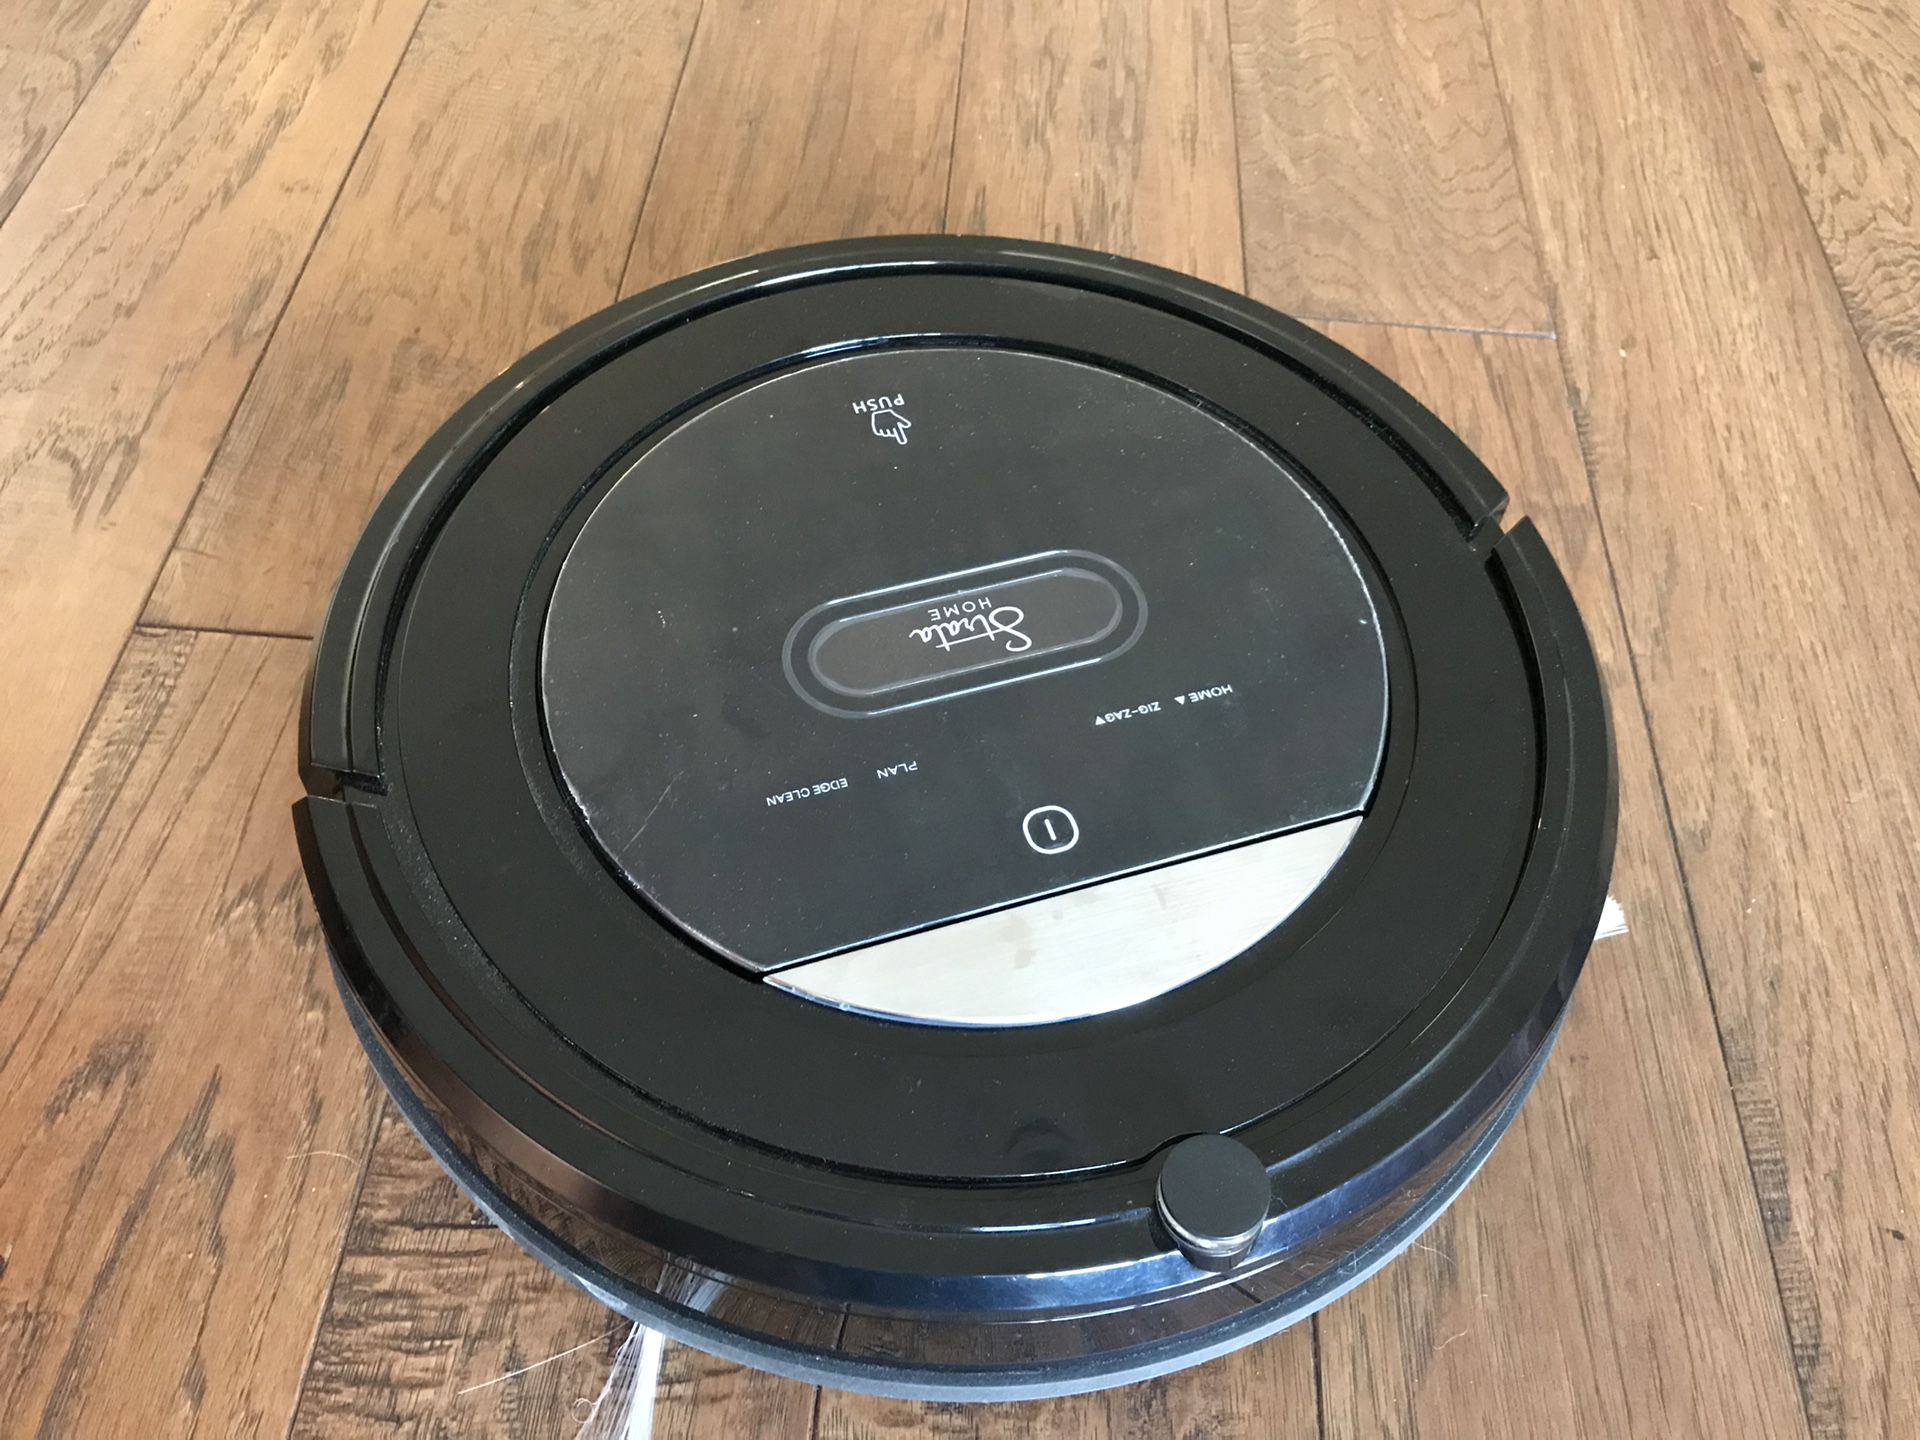 Strata robot vacuum with return home function